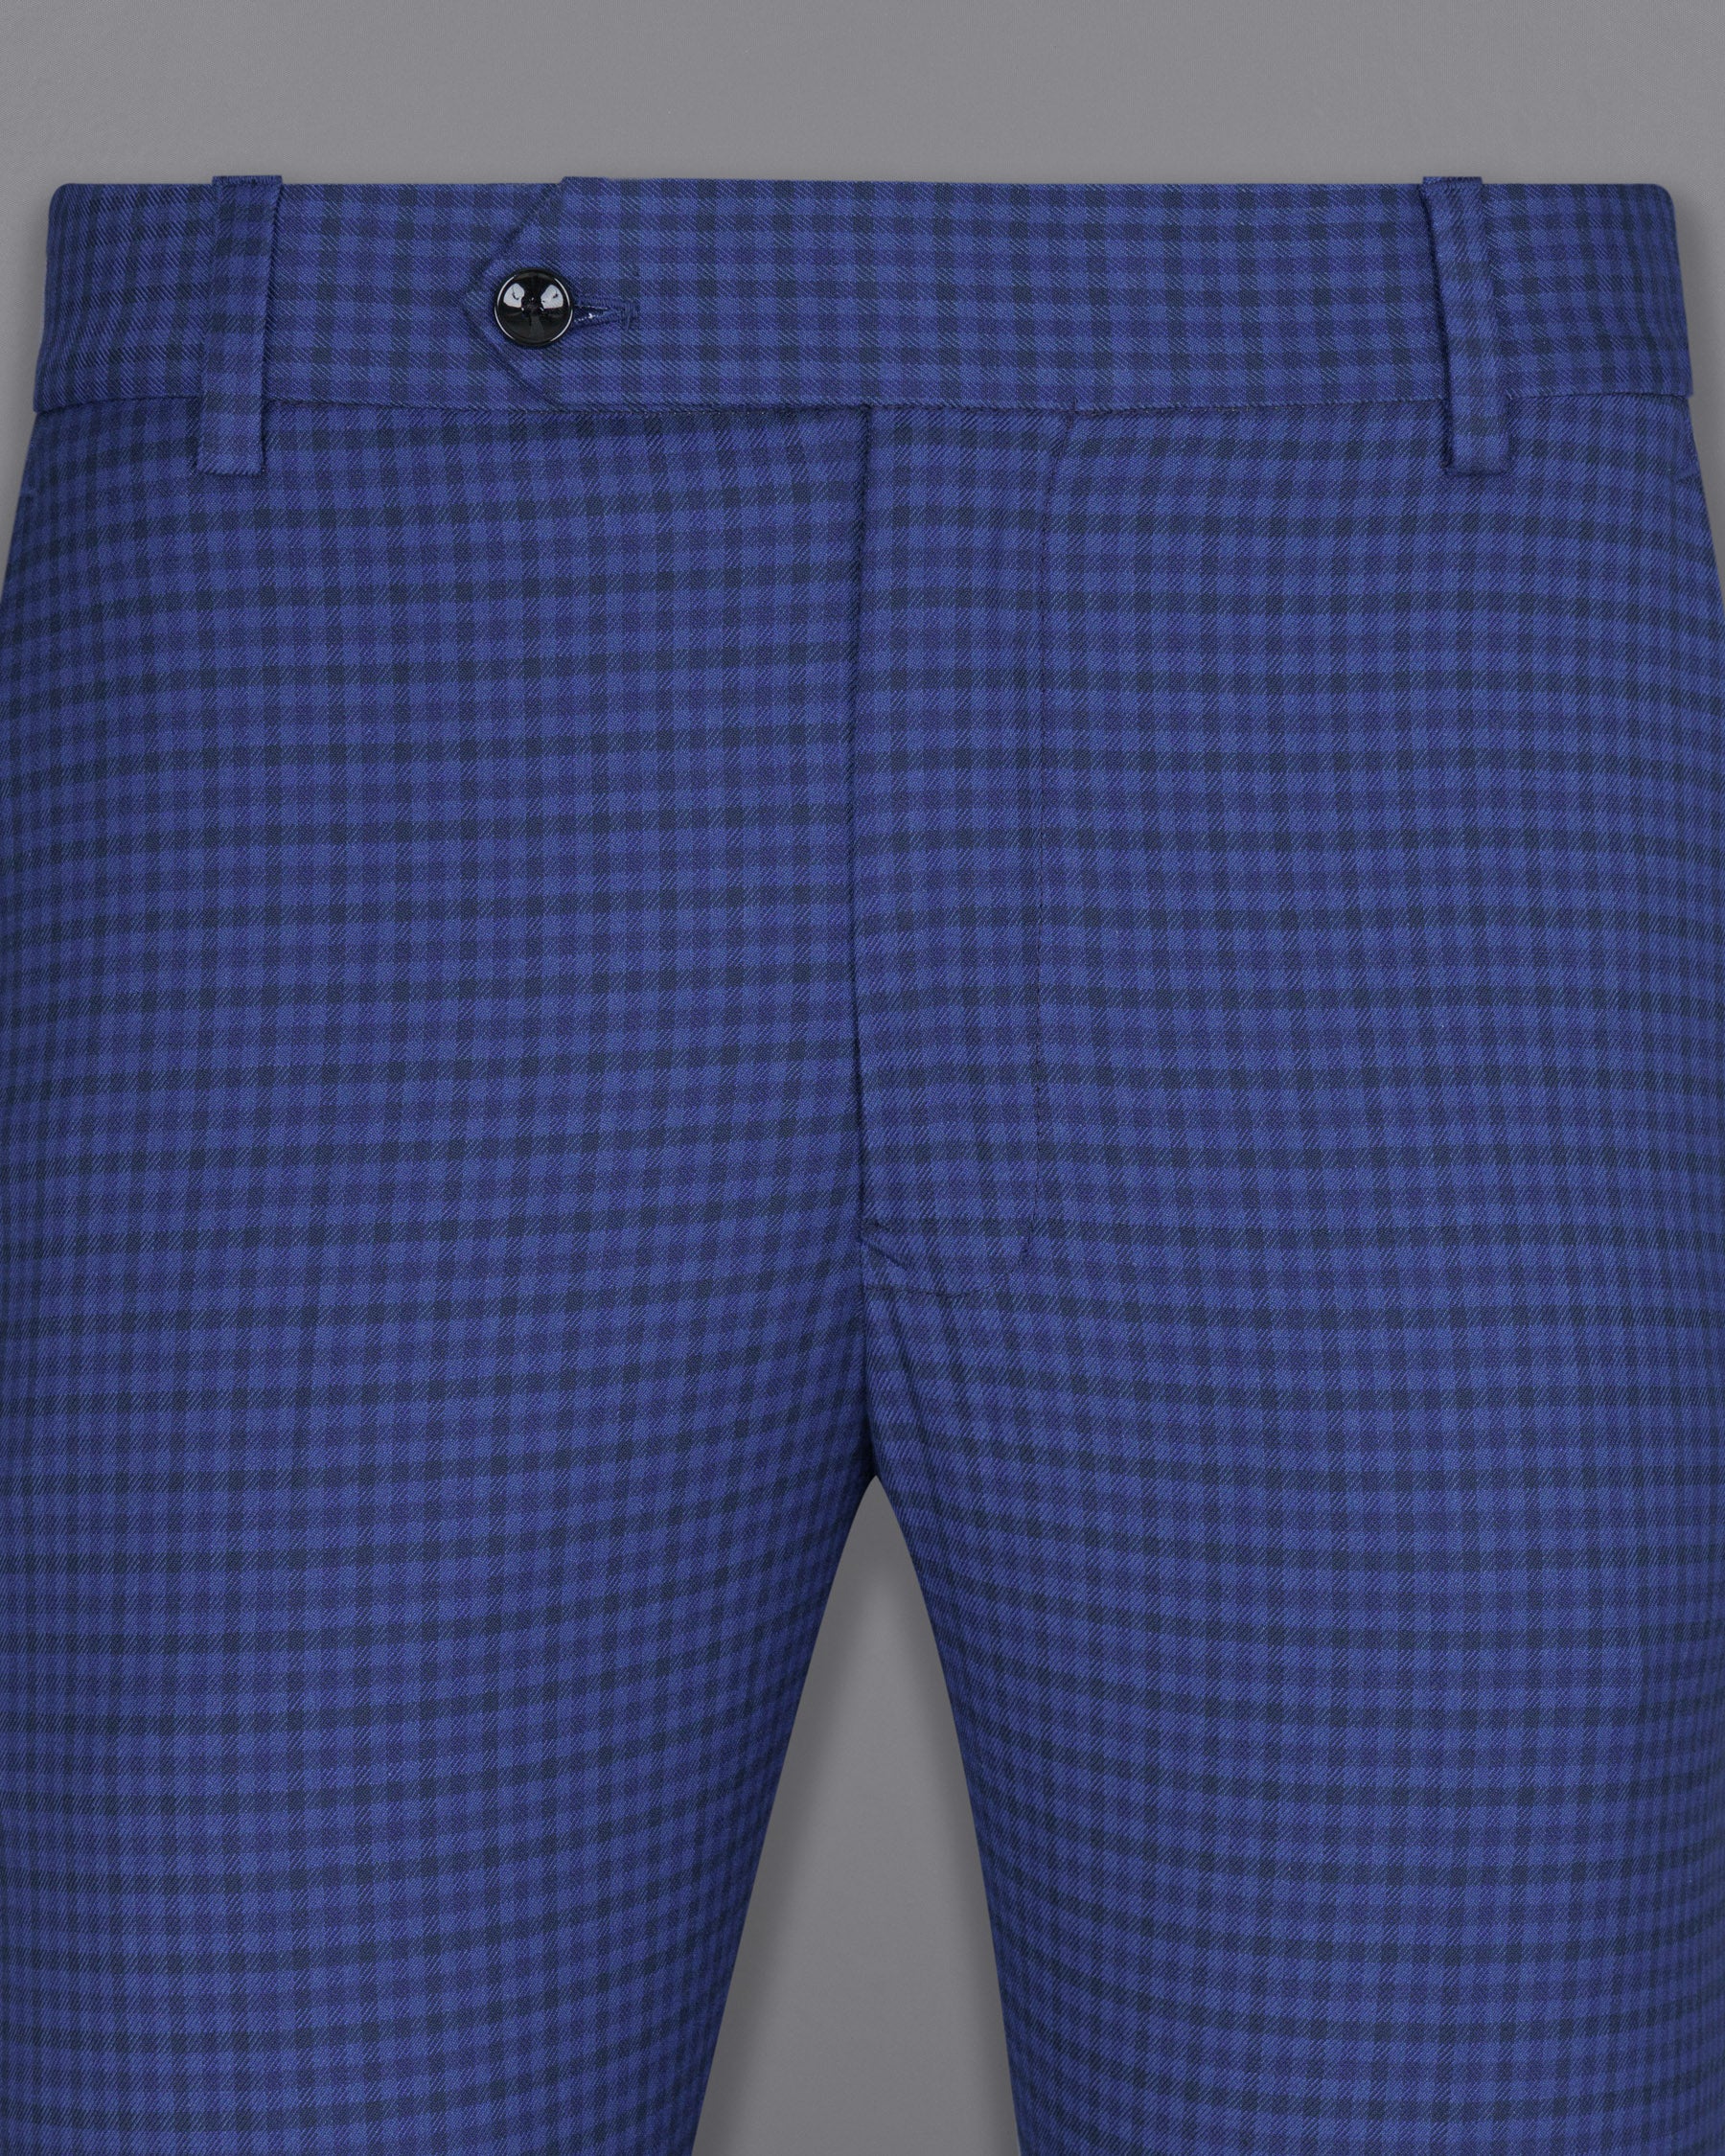 East Bay Blue Gingham Woolrich Pant